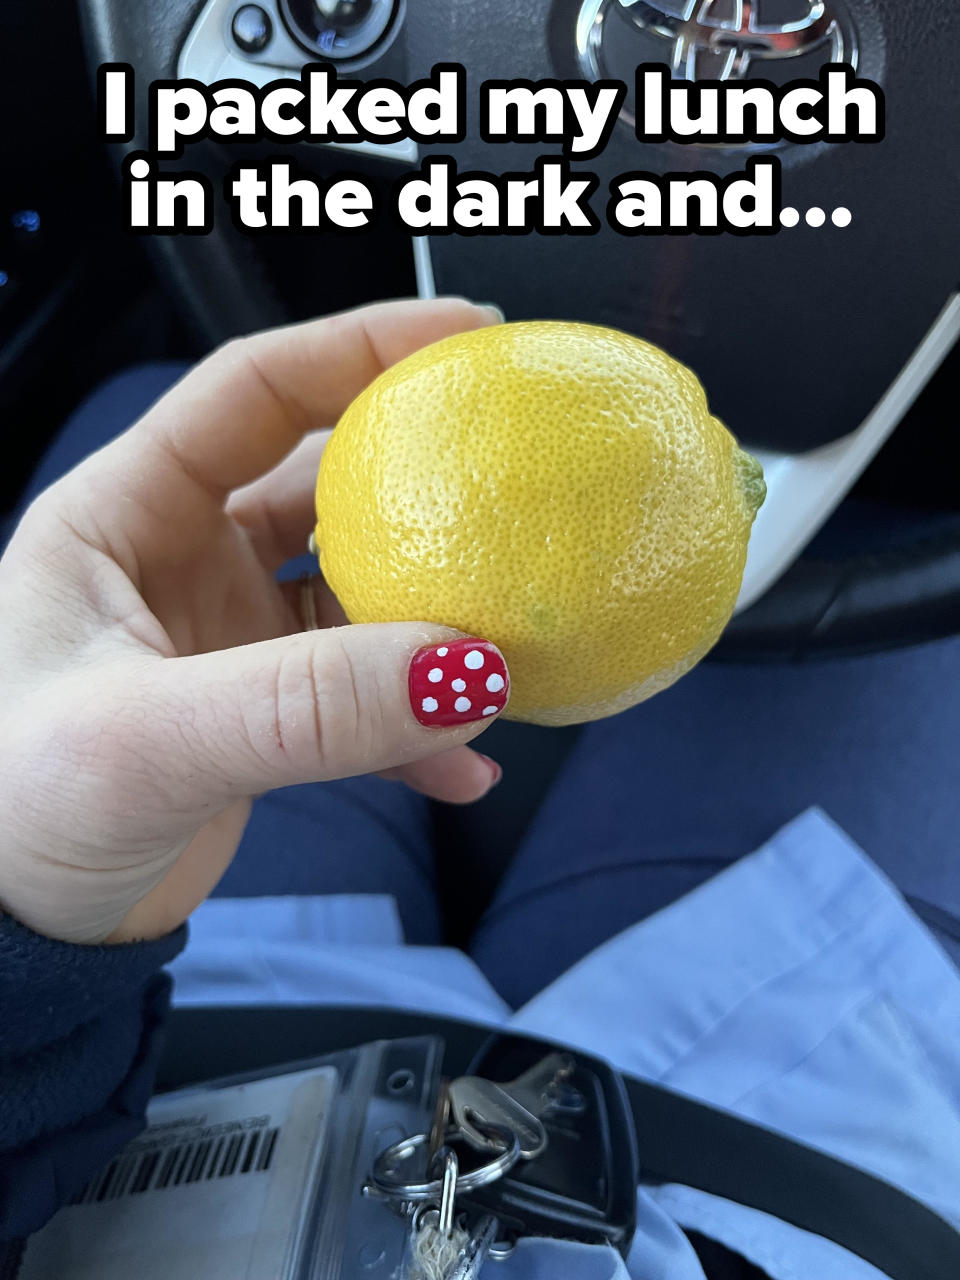 A person holding a lemon with caption "I packed my lunch in the dark"